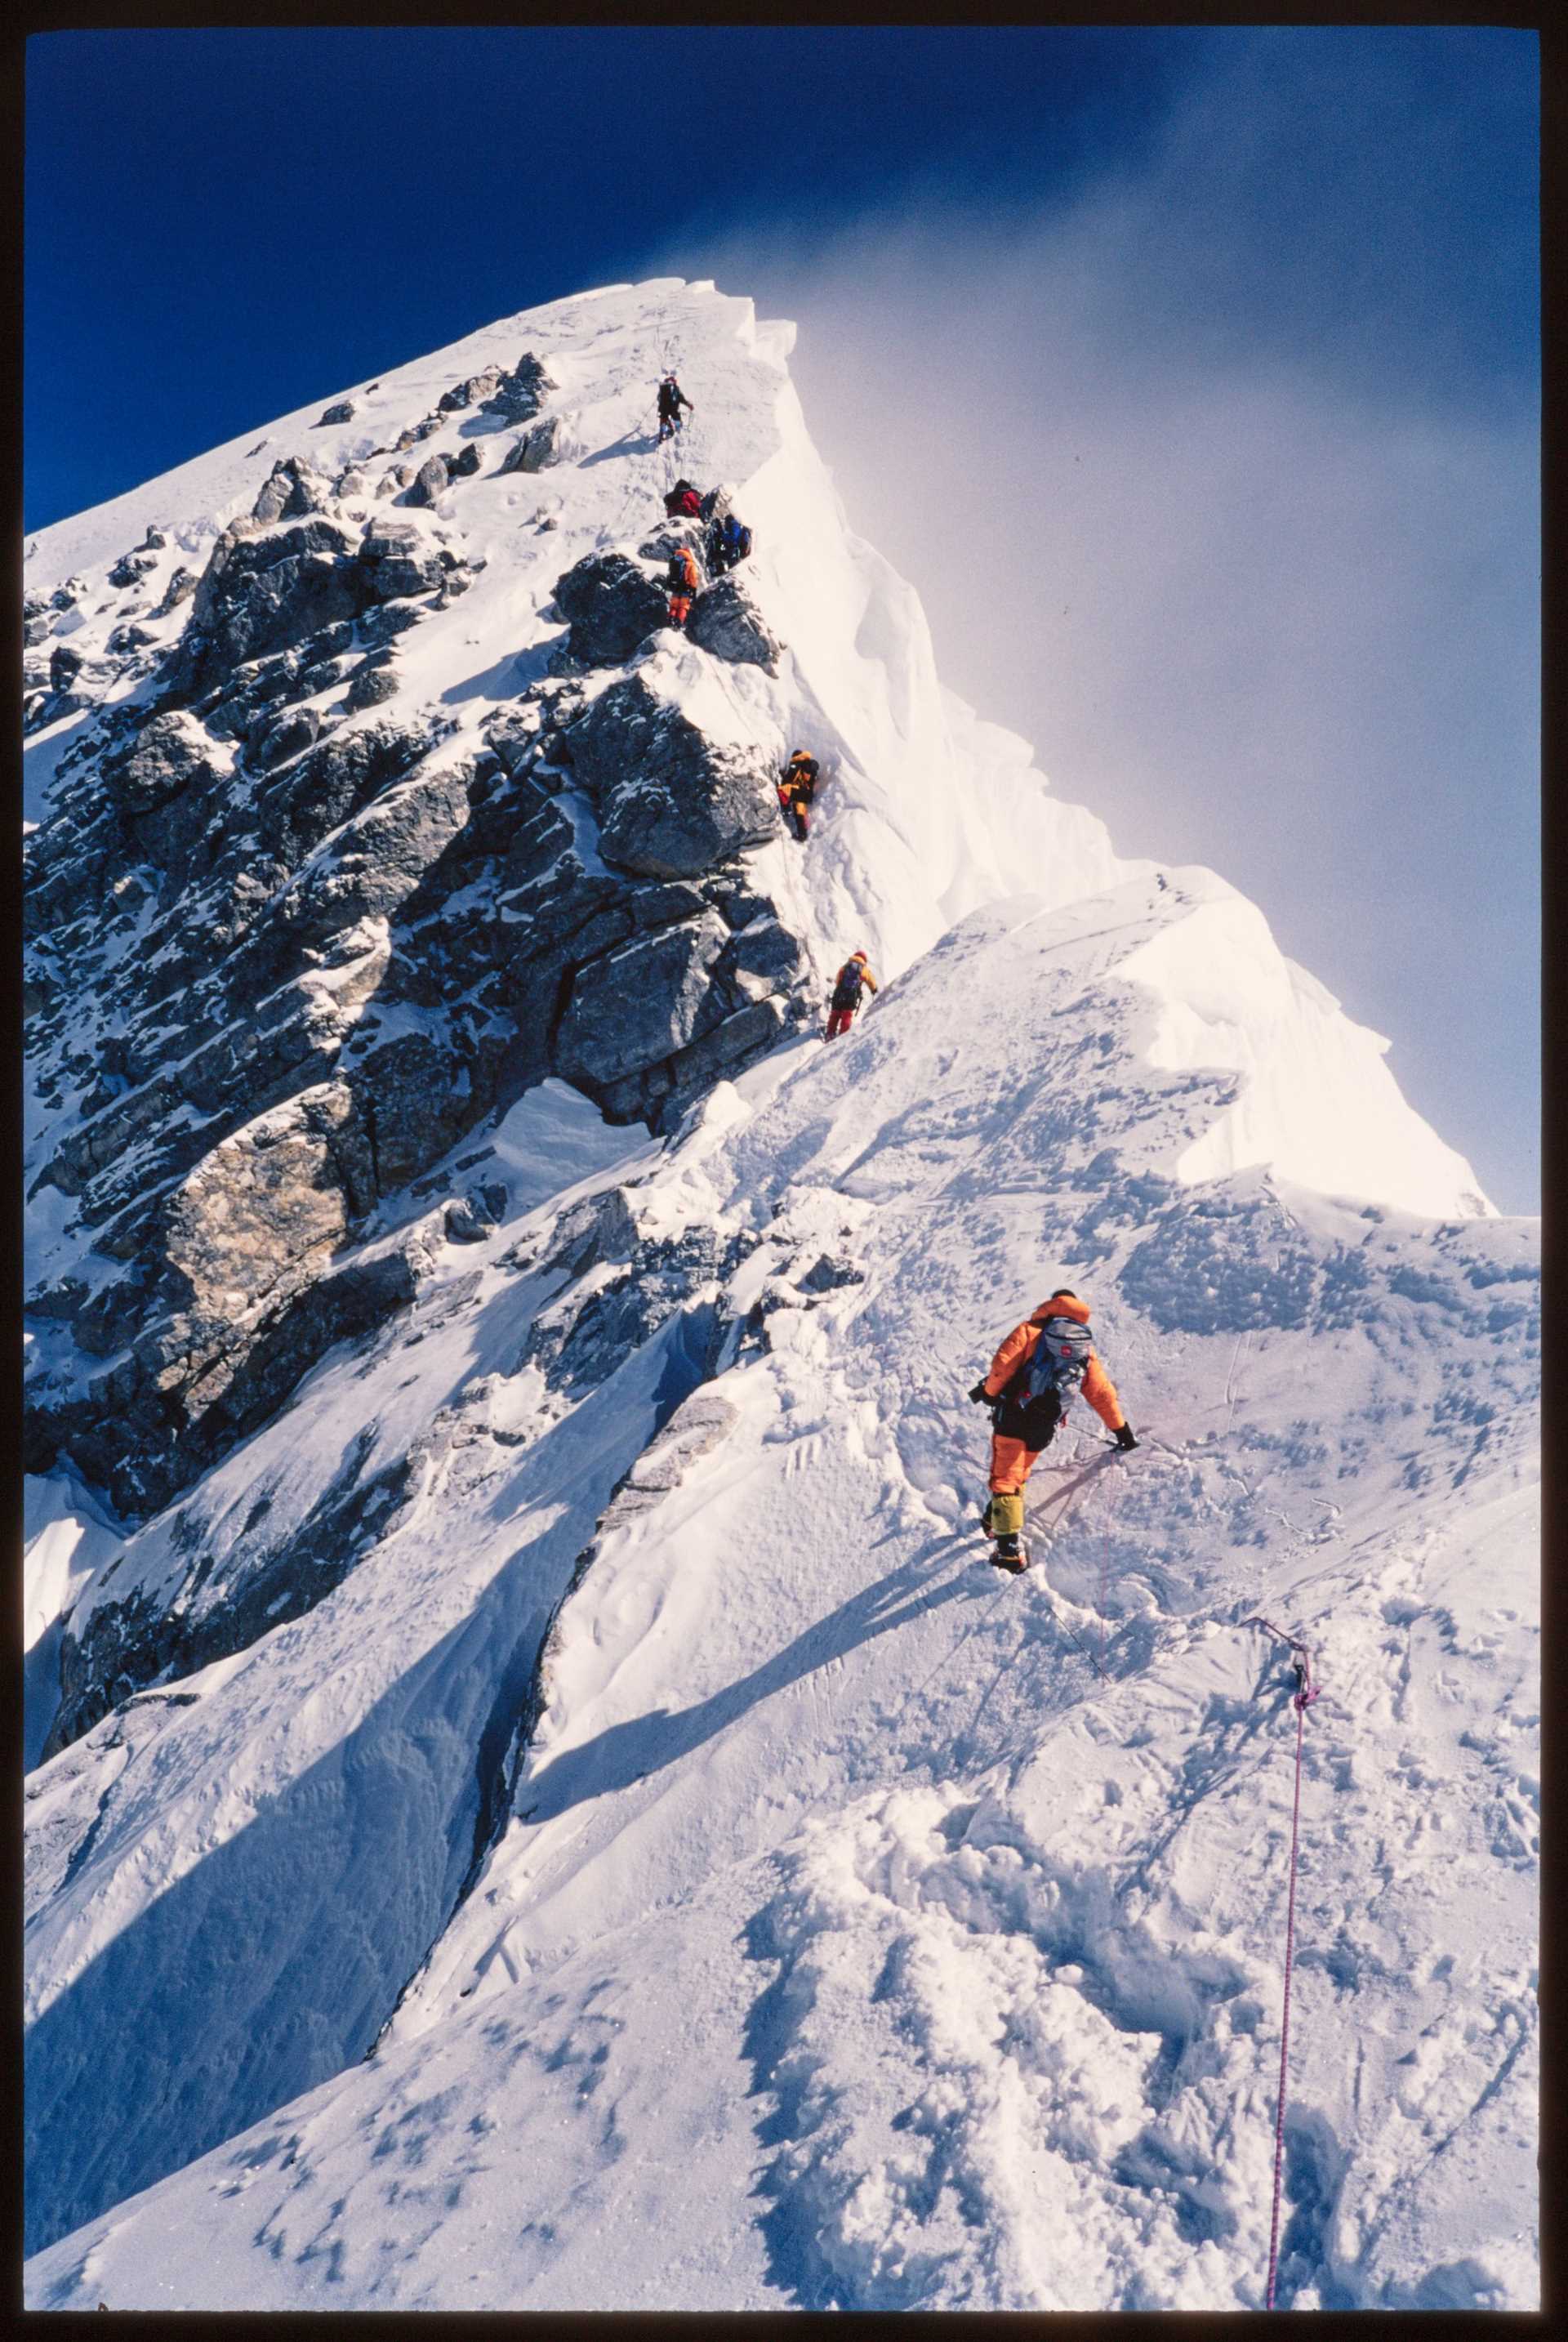 Looking up to the Hillary Step _Everest 2002_082.jpg